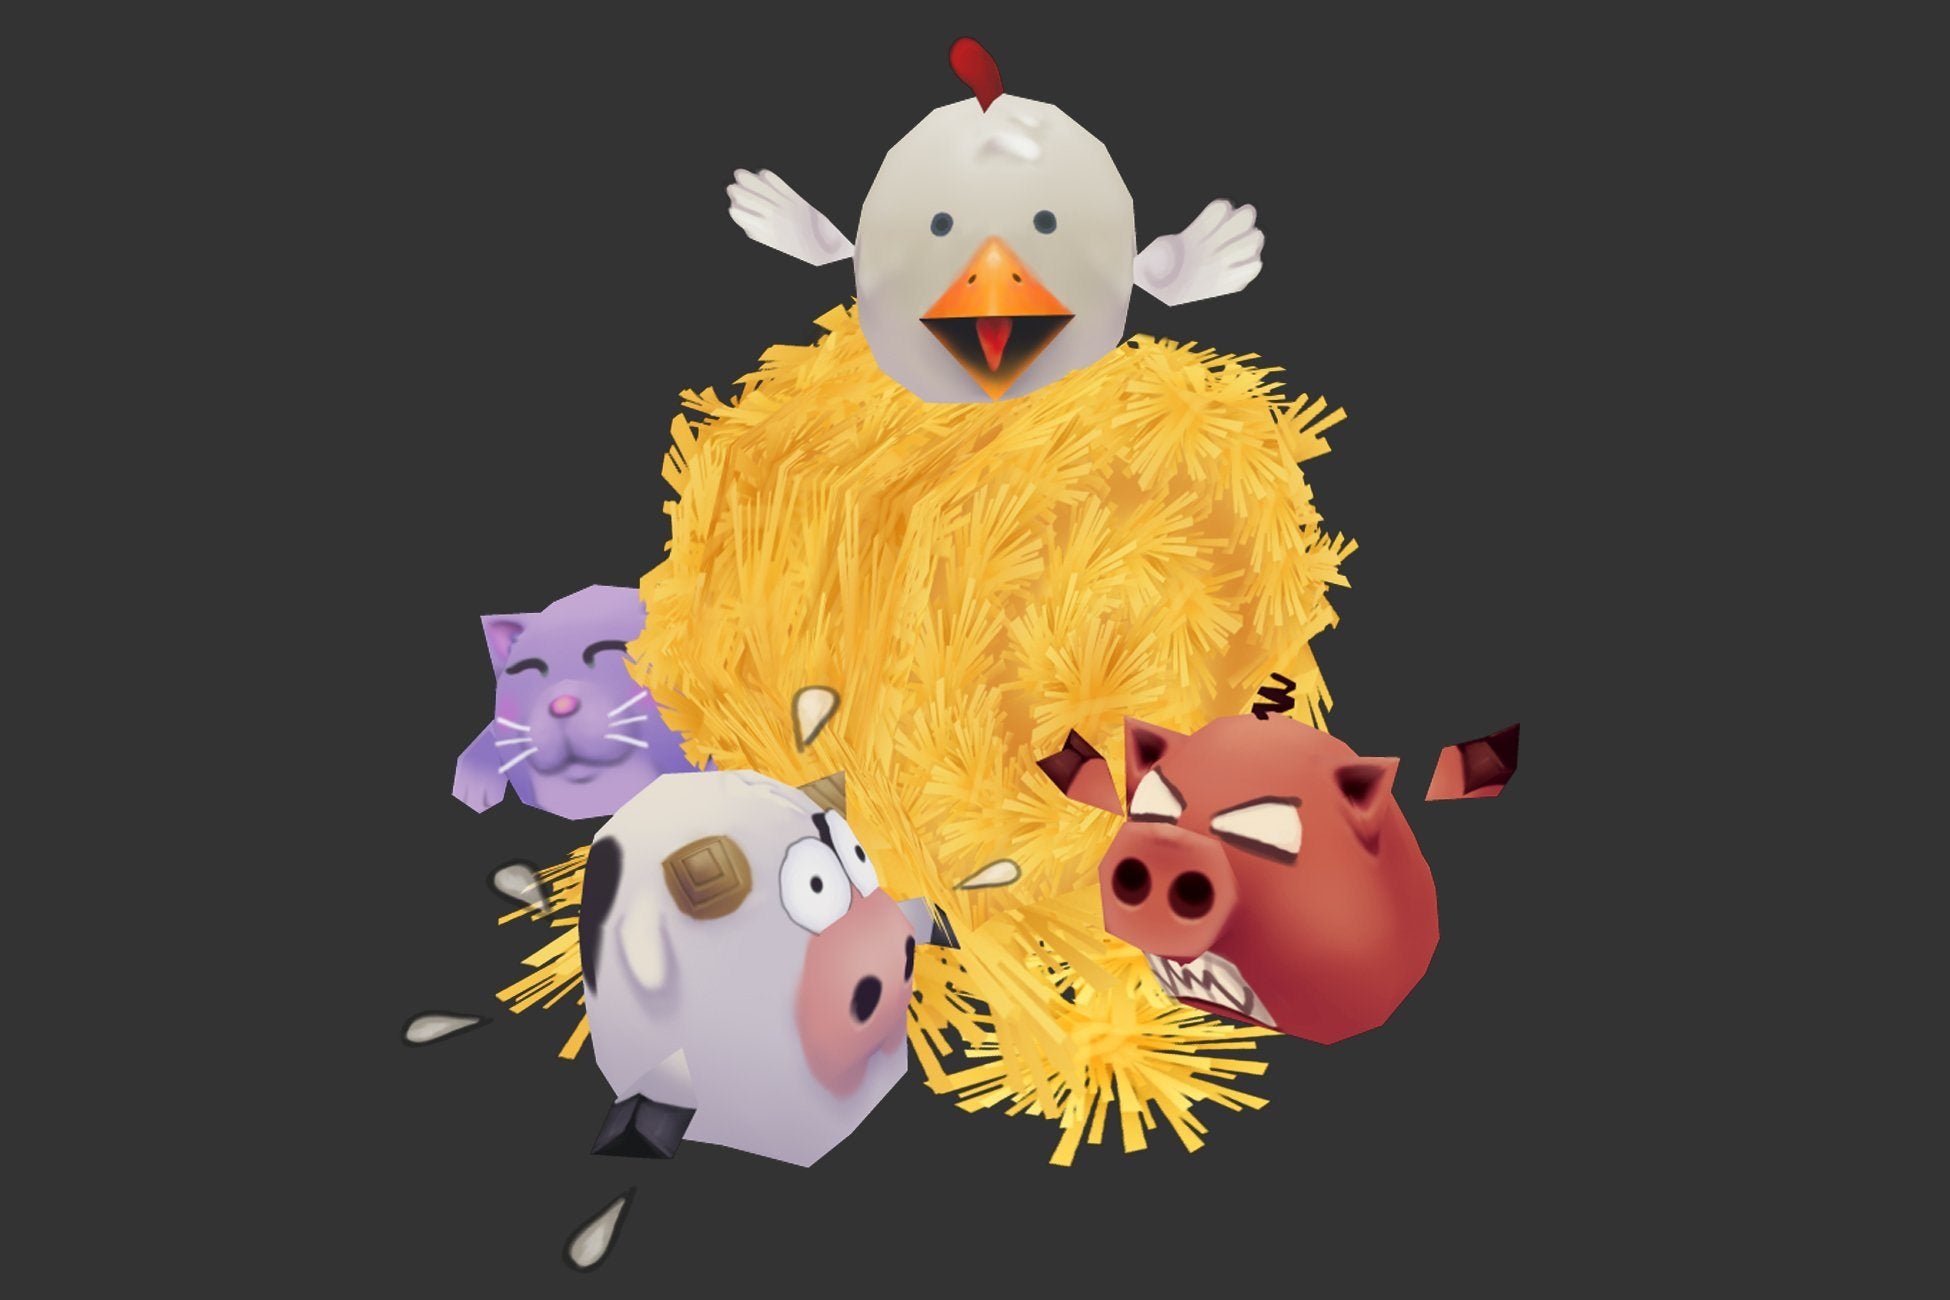 Микро поли. Рустер Руди. Петух Руди. Low Poly Micro Rooster Rudy model. Rooster Rudy 3d model.